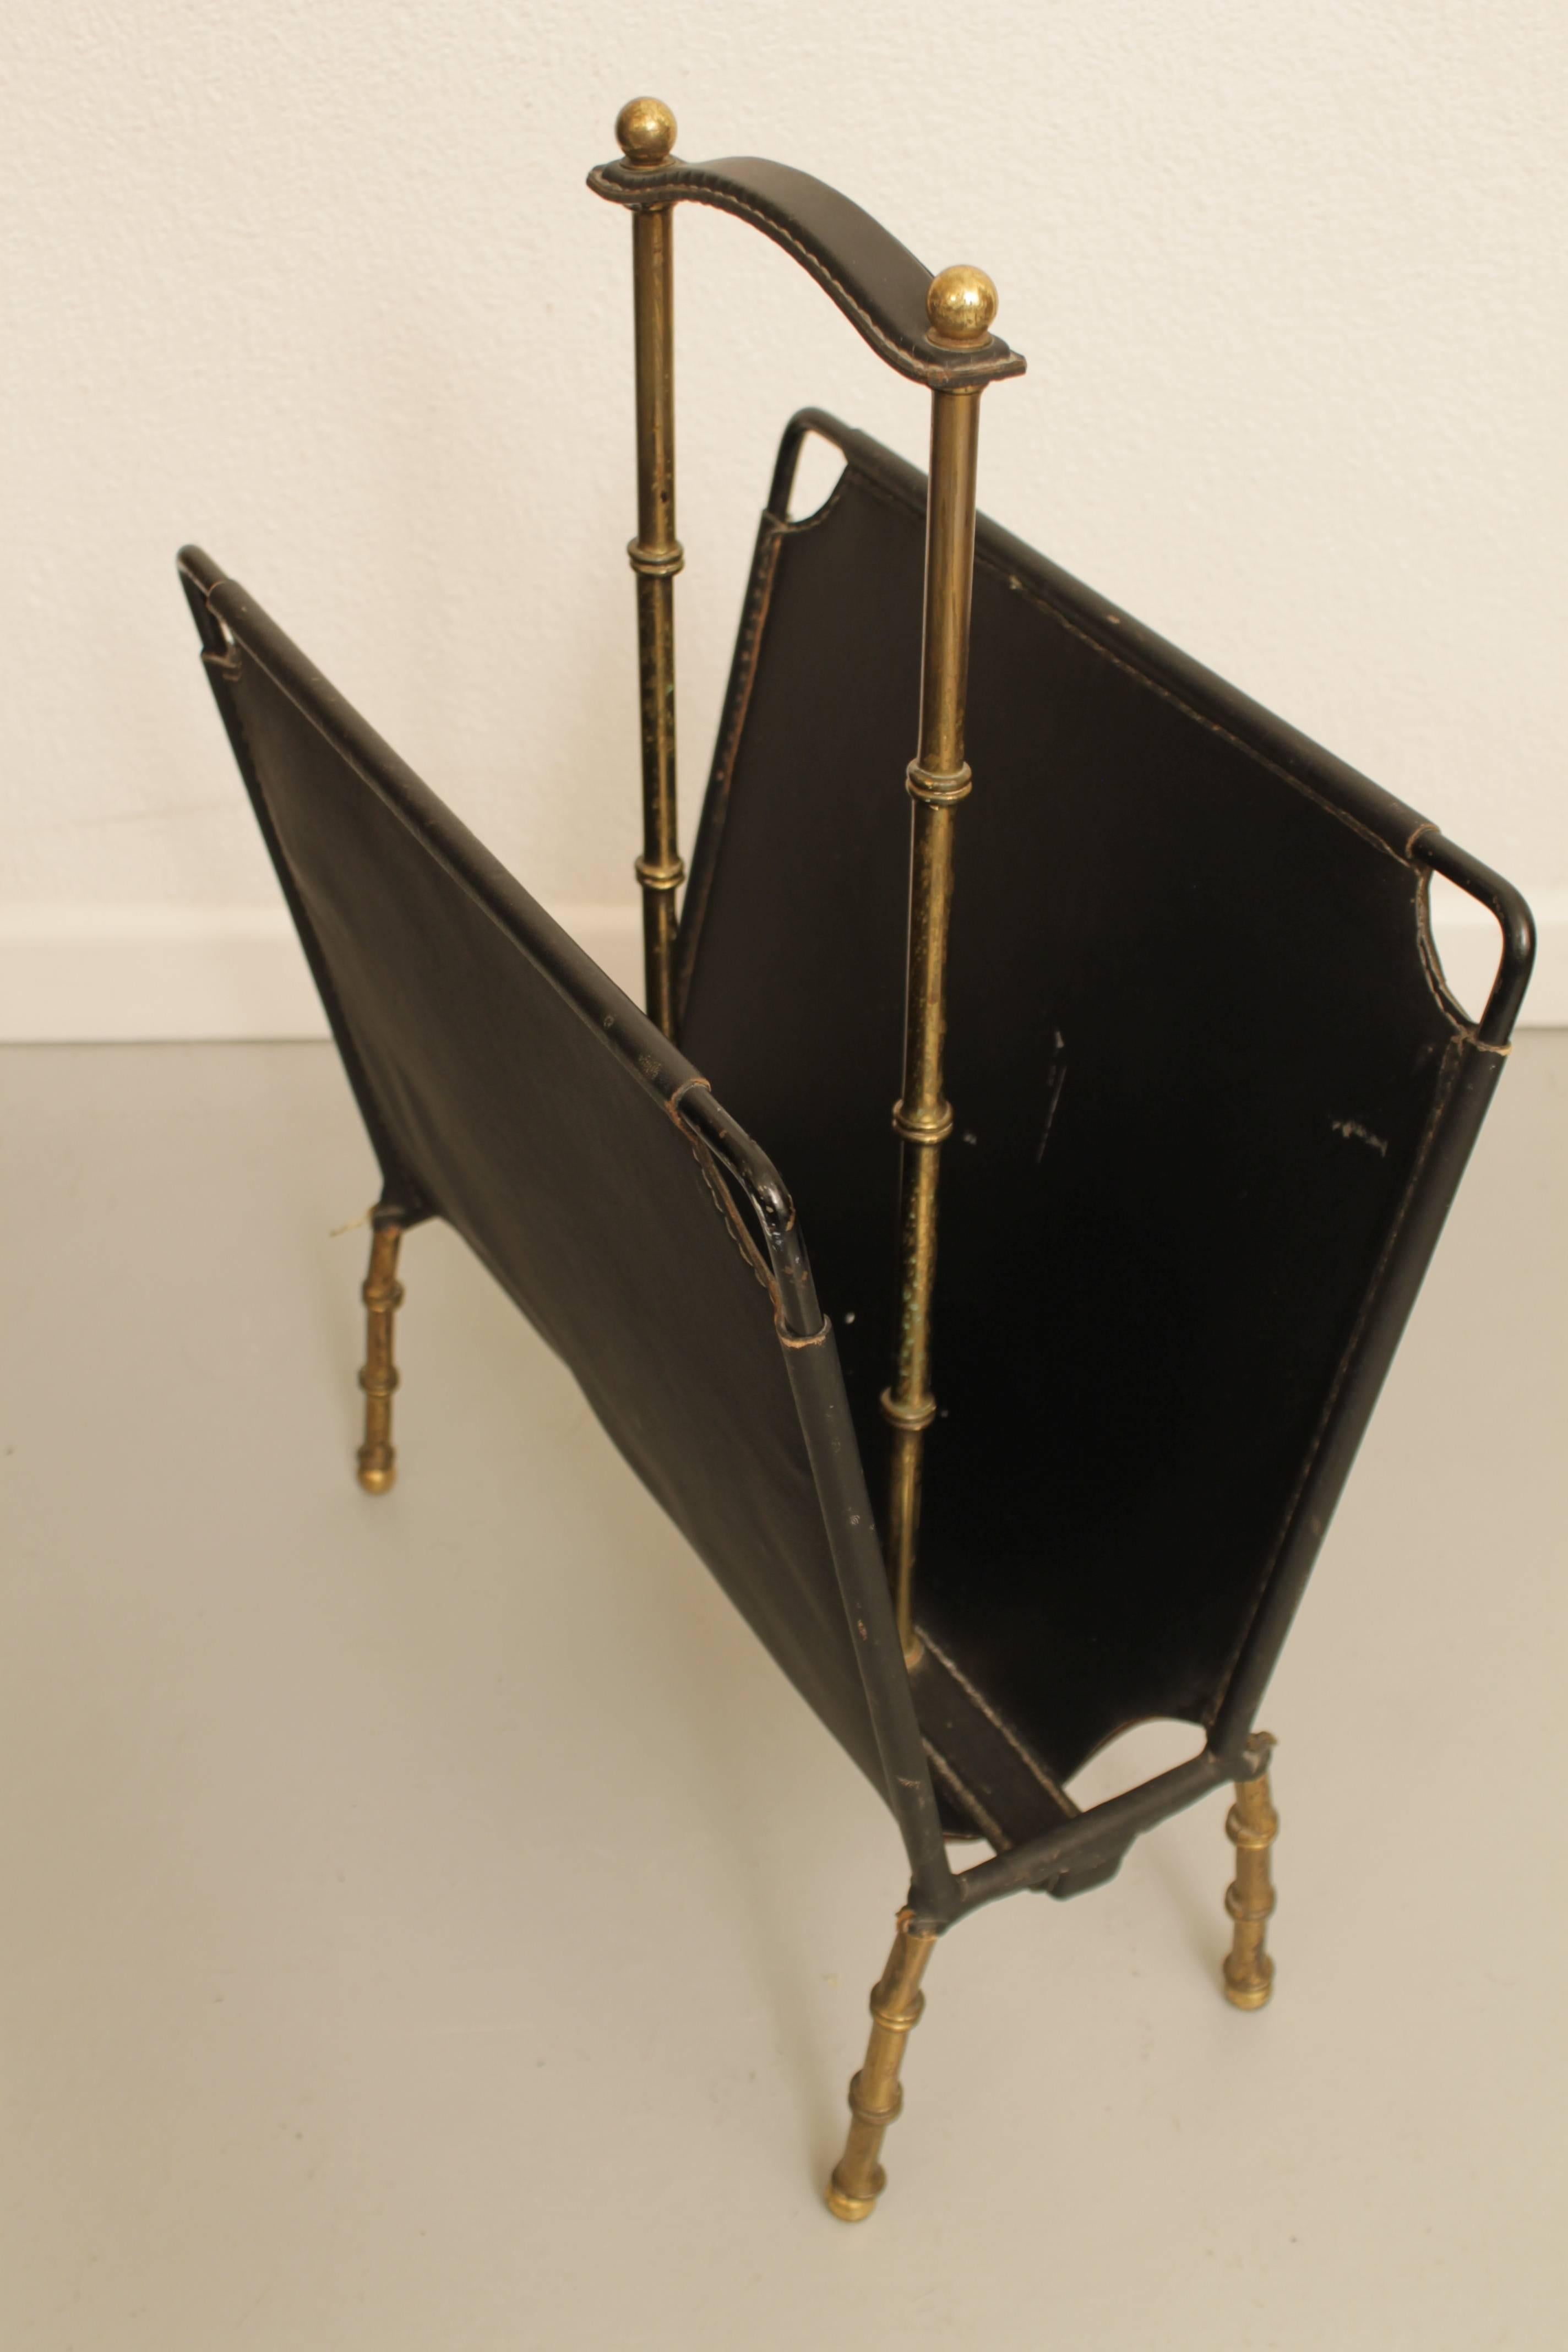 1950's hand-stitched leather and brass magazine rack by Jacques Adnet.
Very good vintage condition.
France ca.1950's
